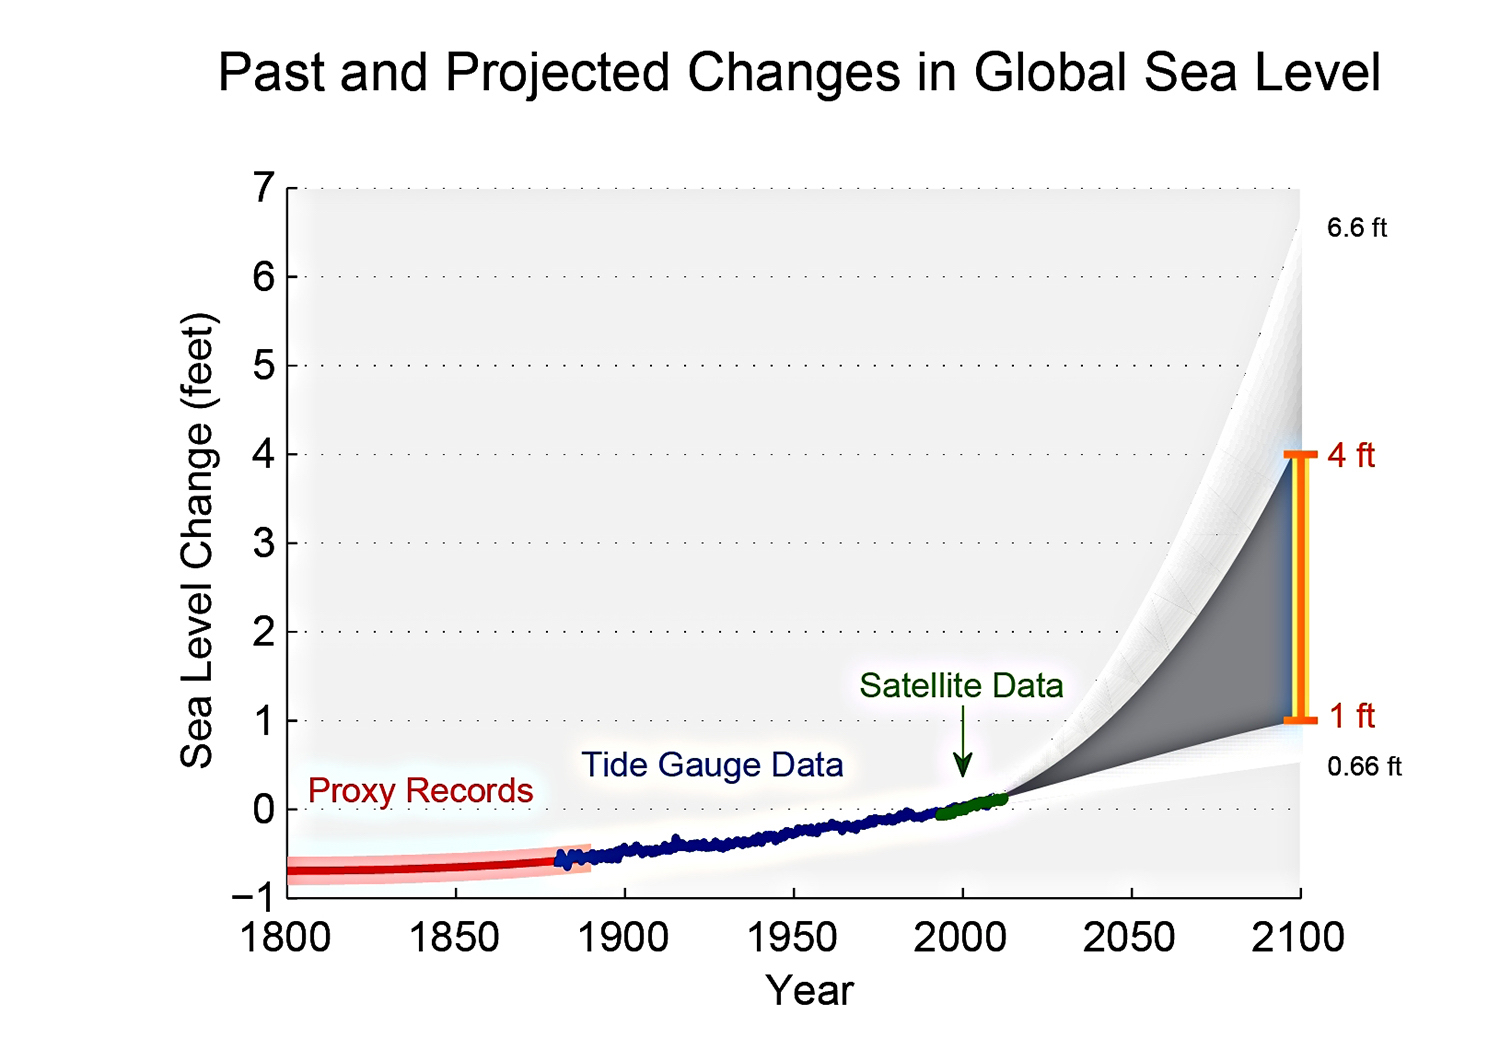 past-and-projected-changes-in-global-sea-level-graph.jpeg